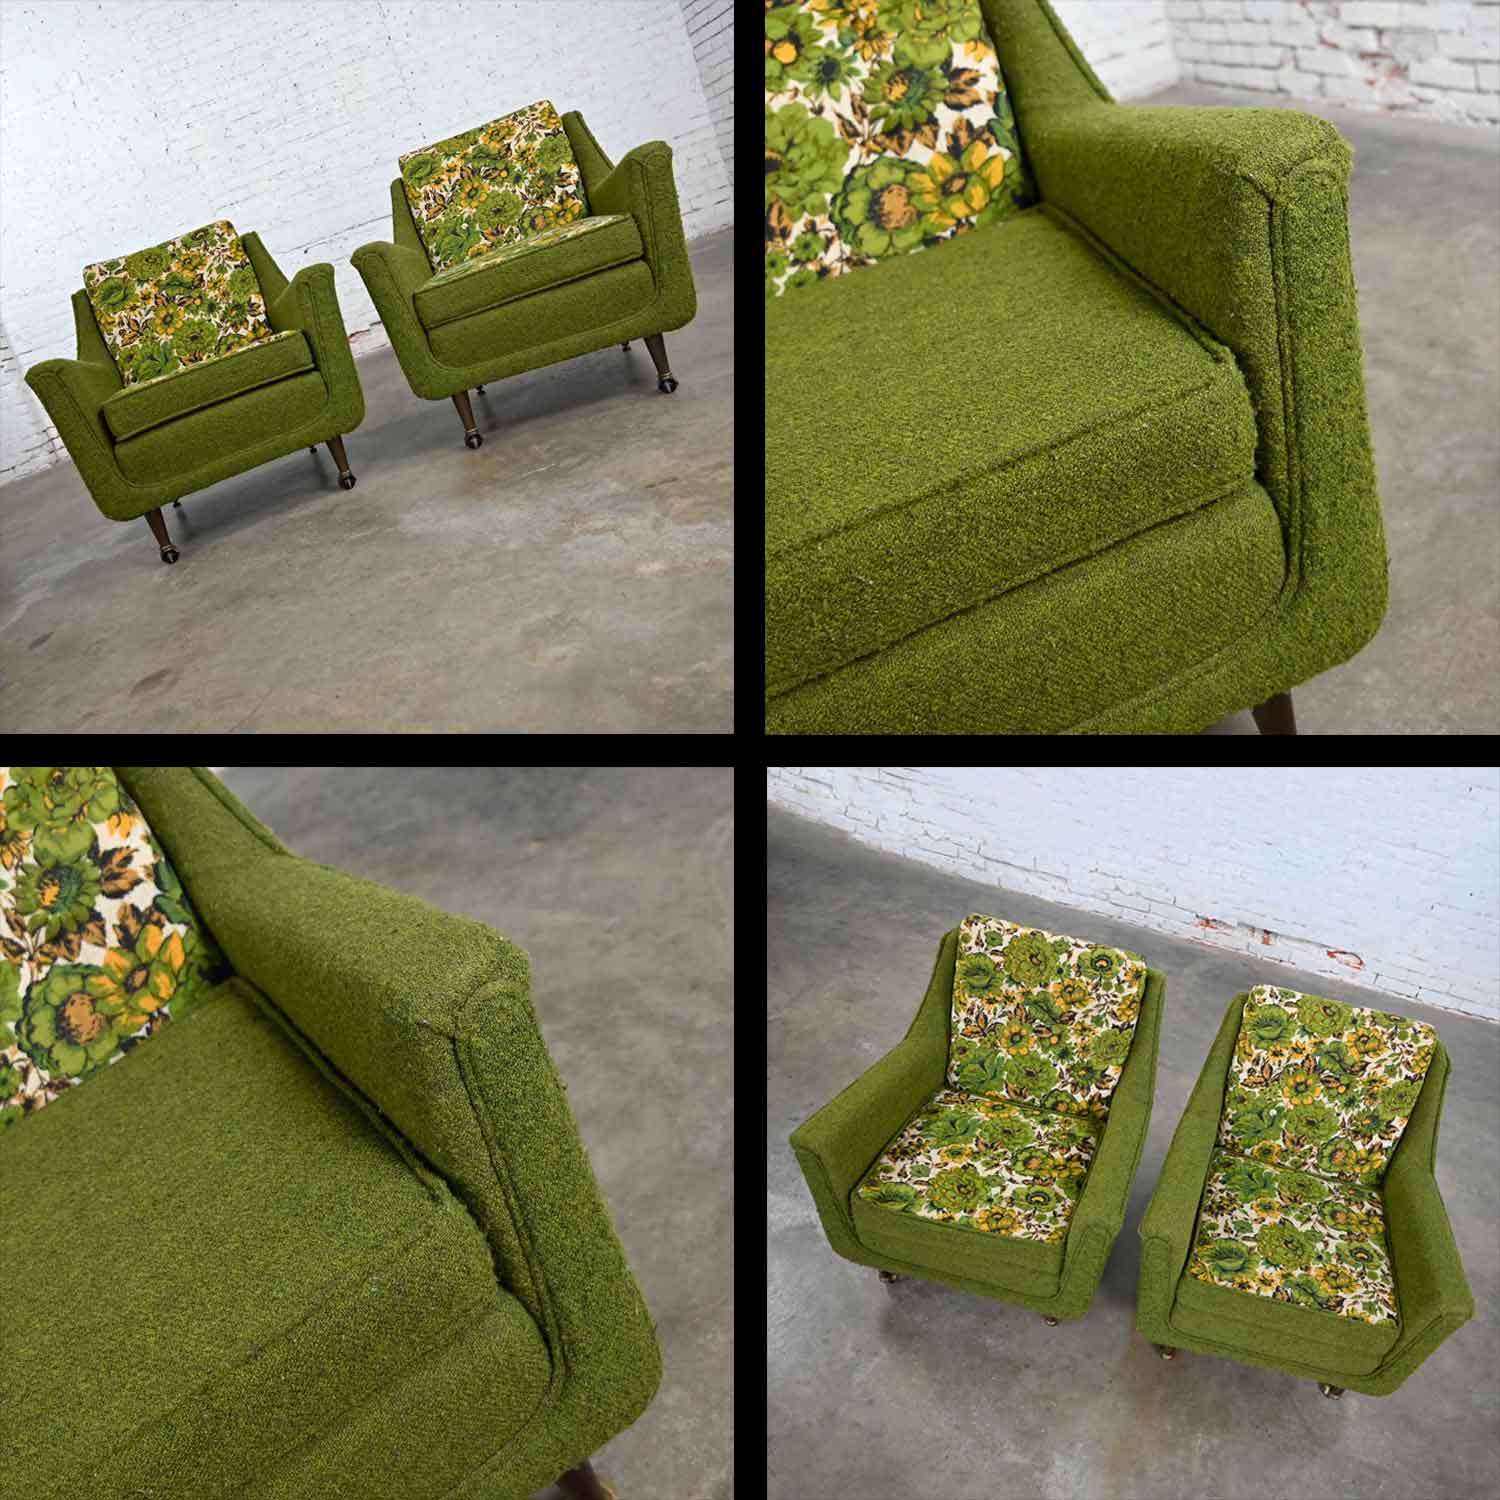 MCM Pair of Two-Toned Lounge Chairs by Mastercraft Original Green & Floral Fabric after Pearsall